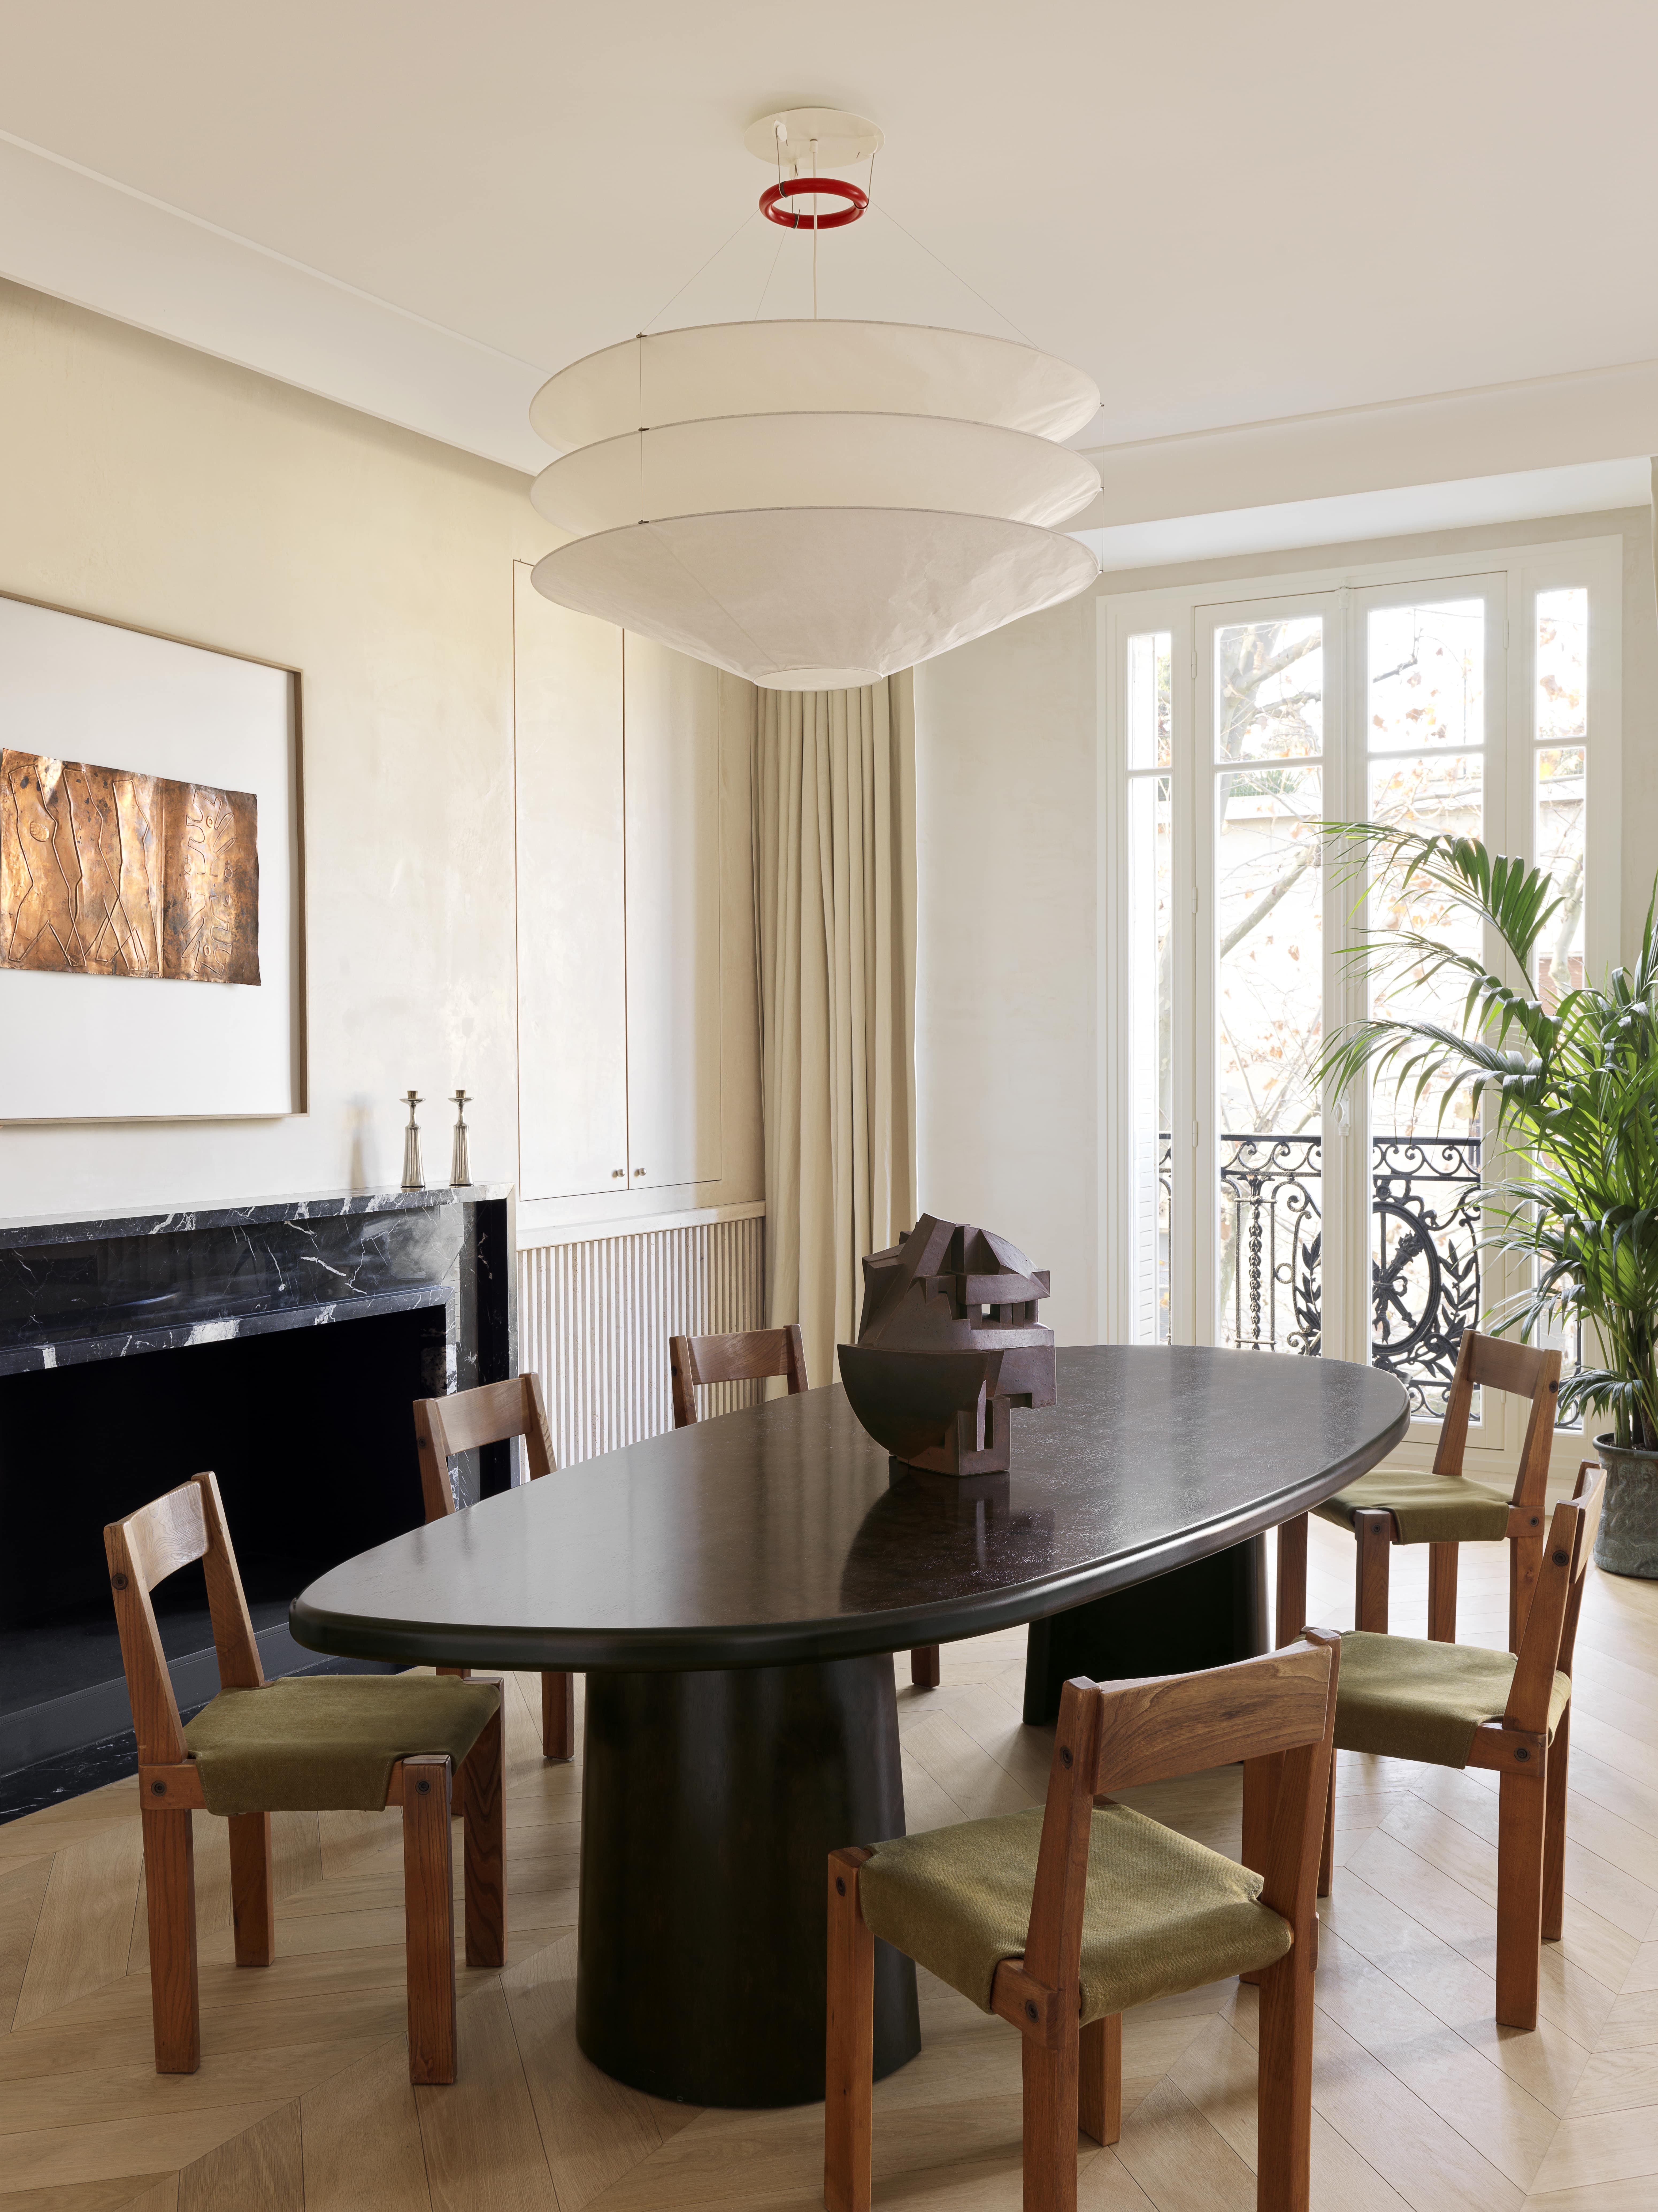 Picture showing the apartment project in Neuilly